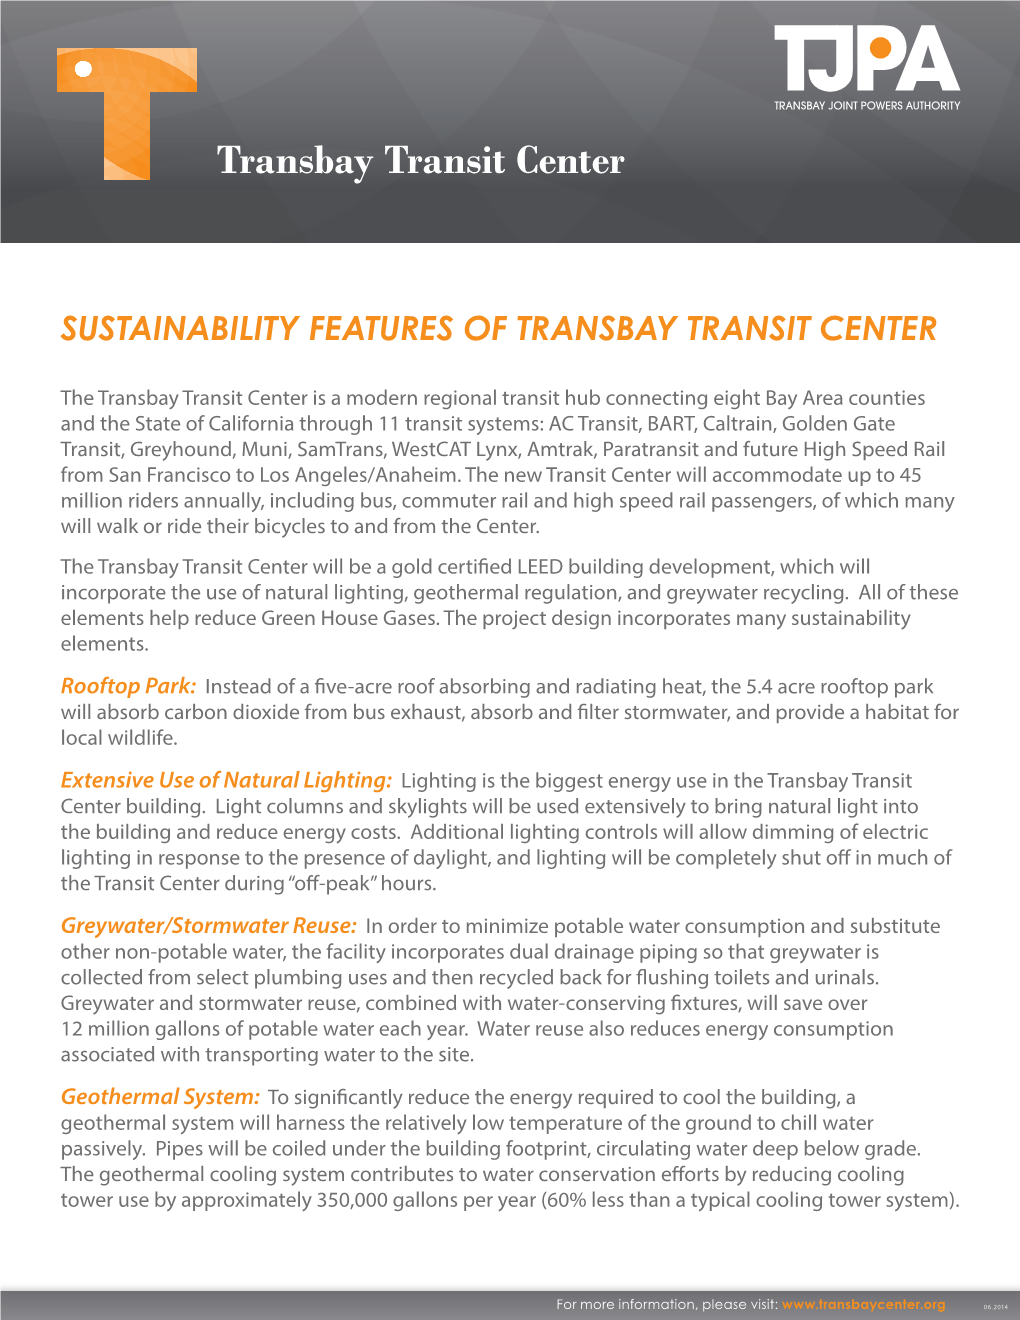 Sustainability Features of Transbay Transit Center